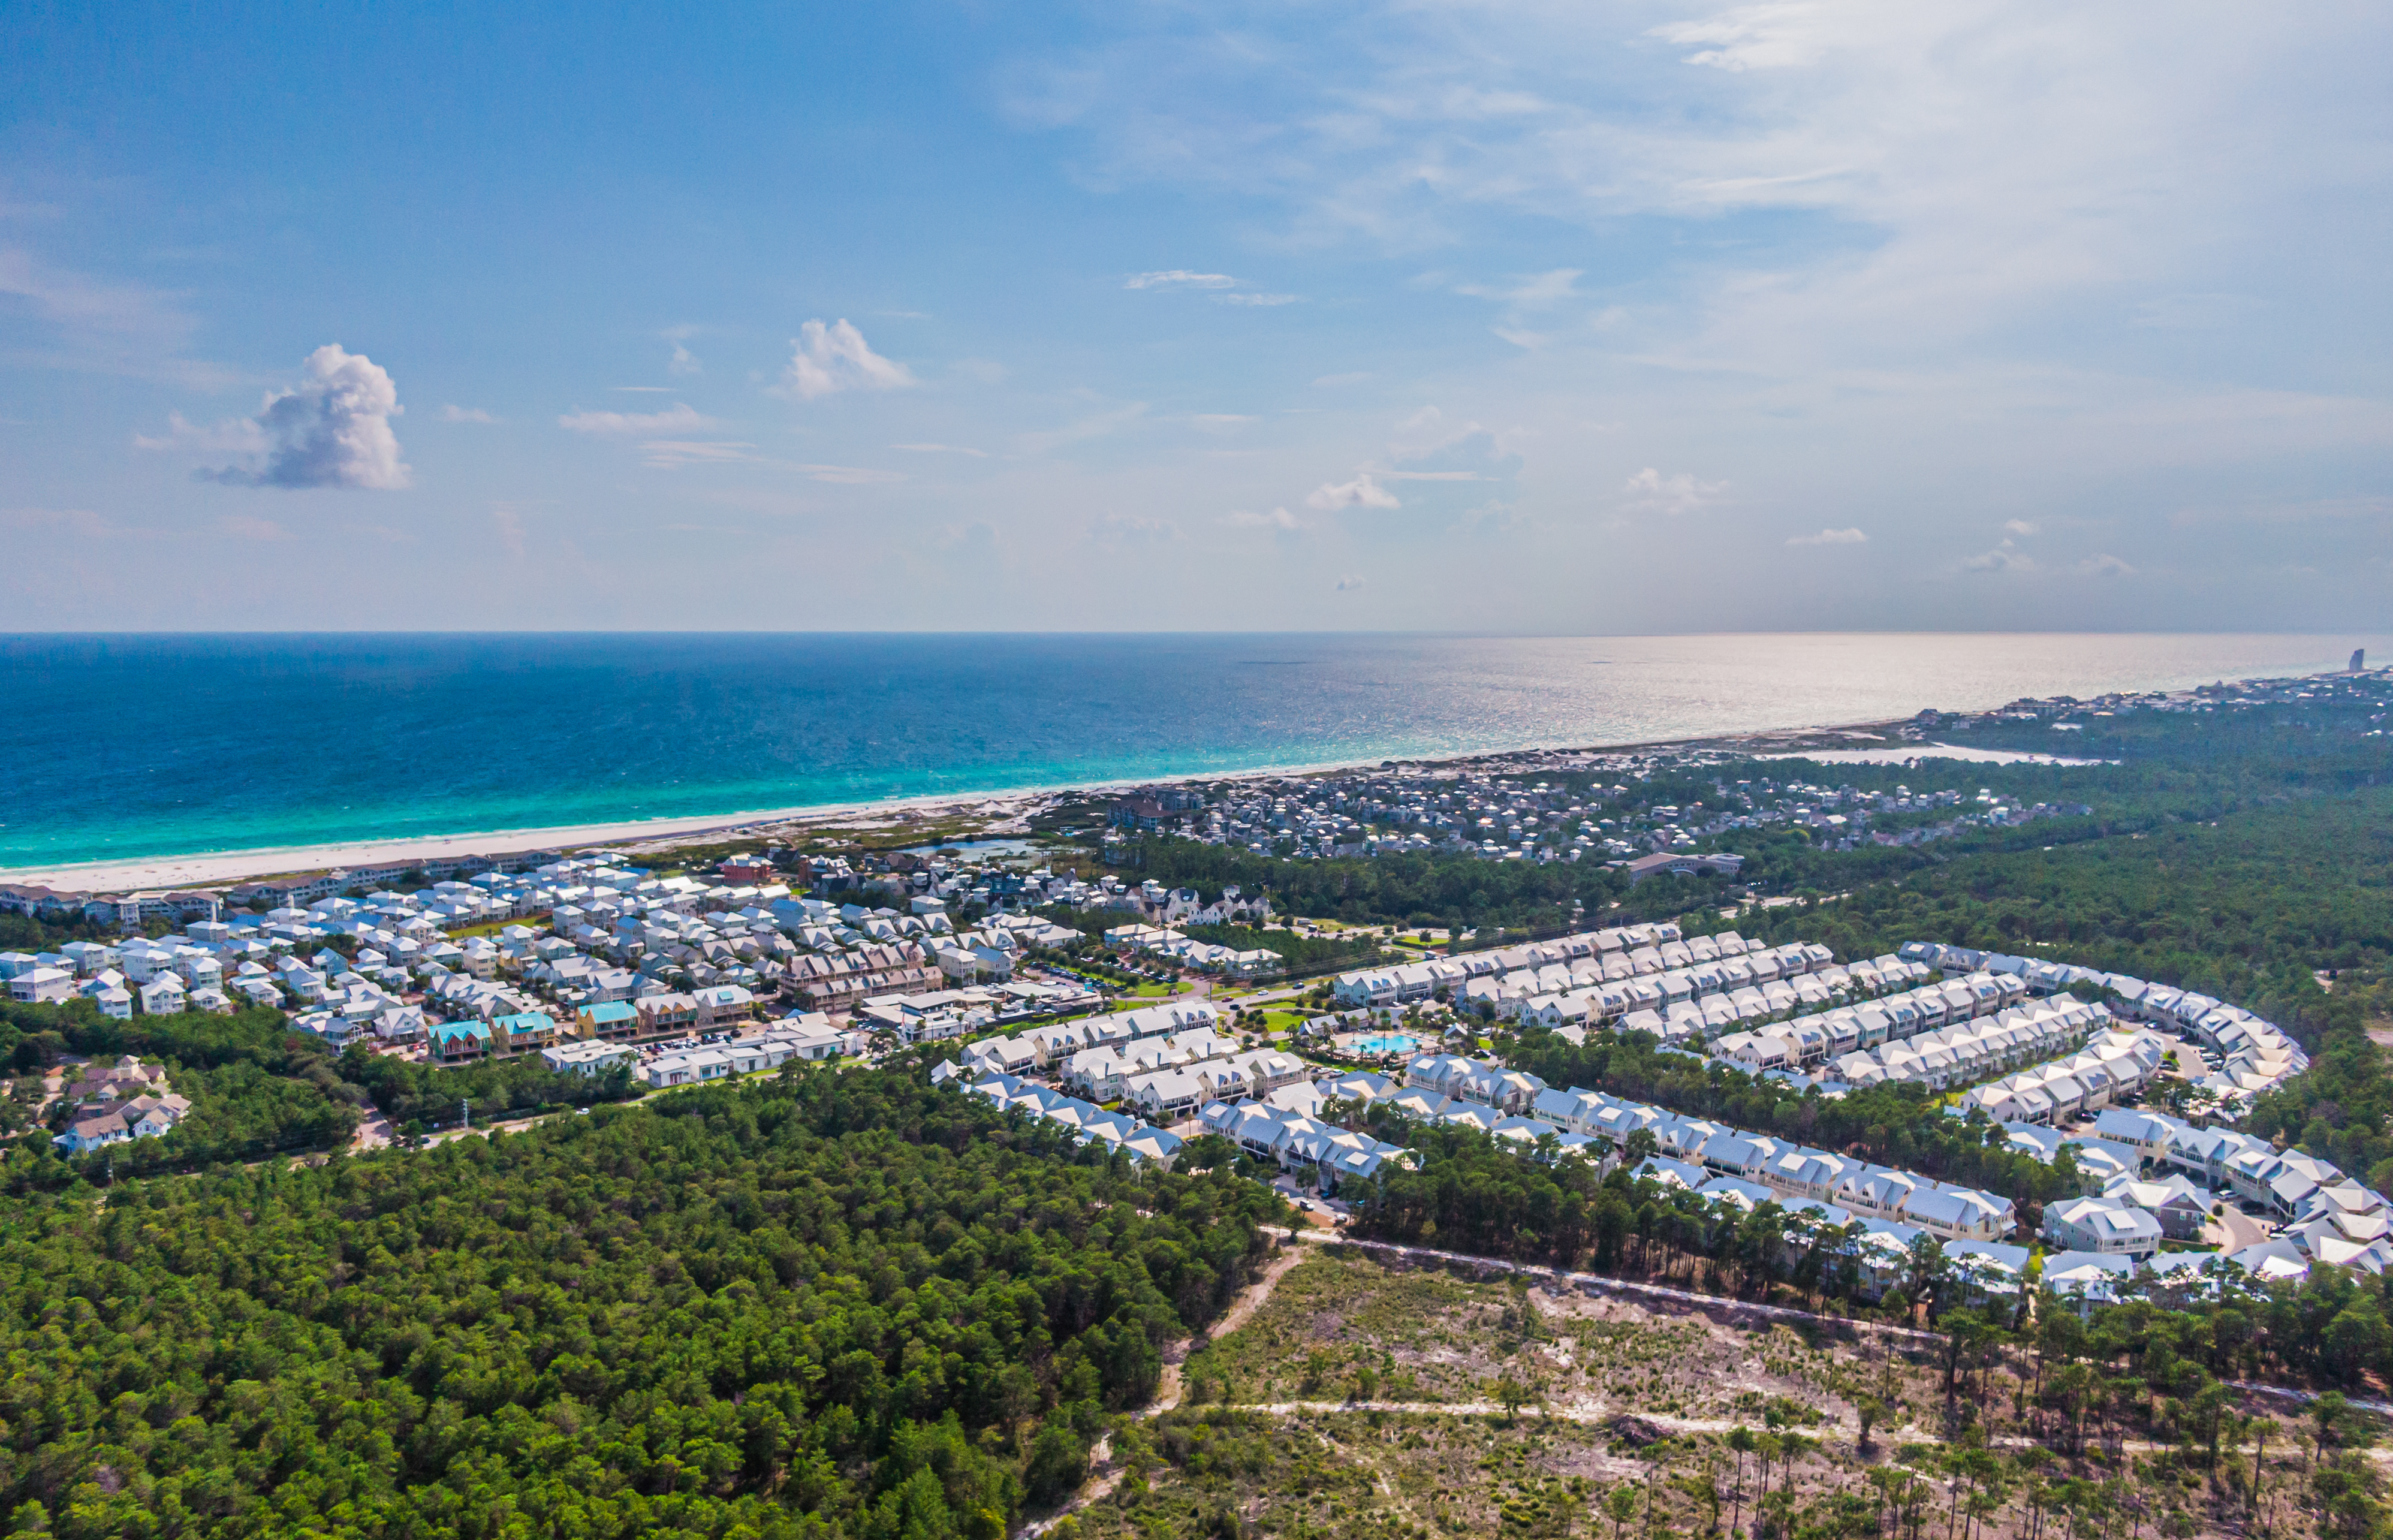 An aerial view of the Prominence community with the gulf in the background in the late afternoon